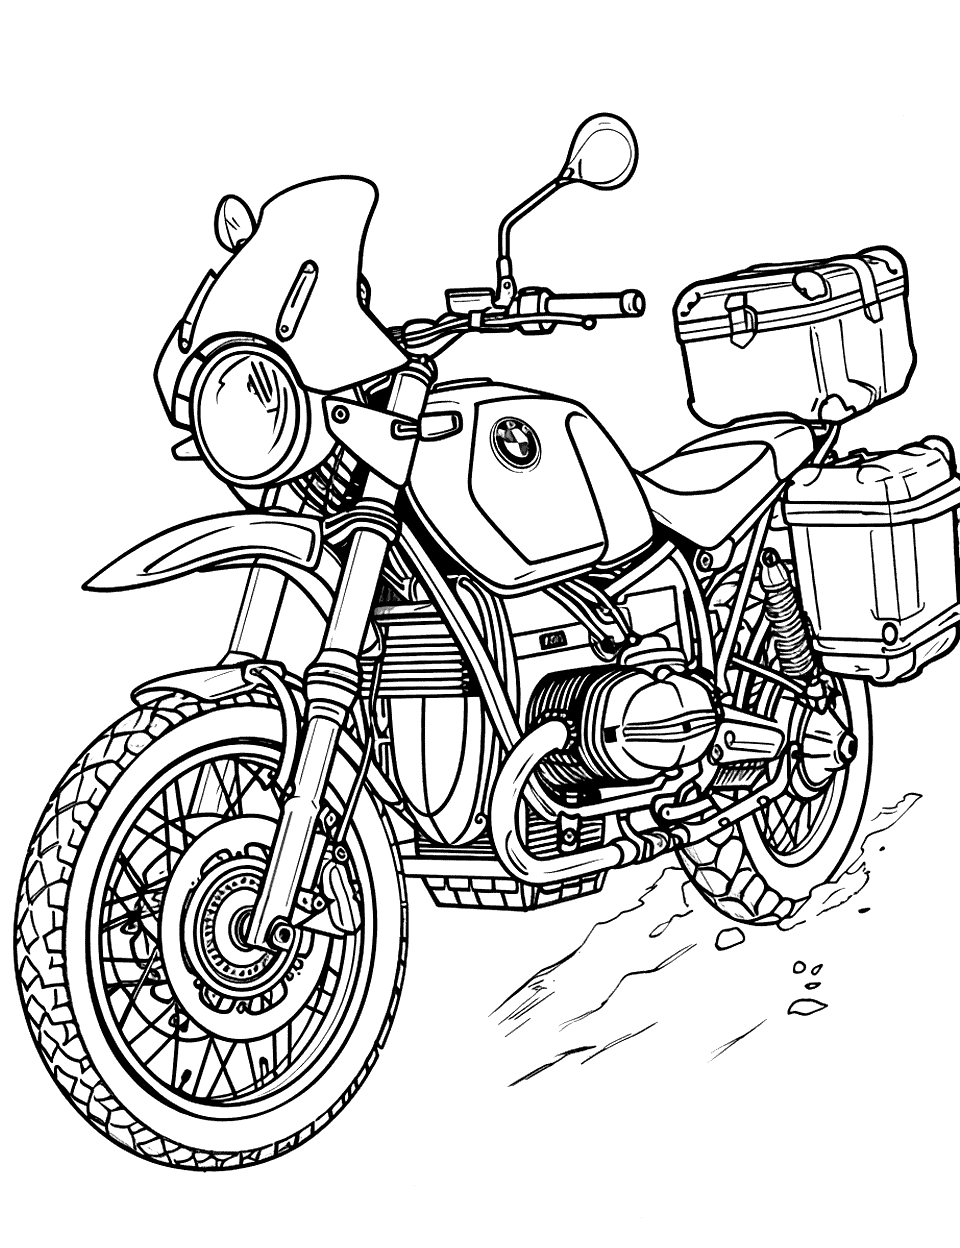 BMW Motorcycle Tour Coloring Page - A BMW motorcycle with sidecases, ready for a long-distance tour.